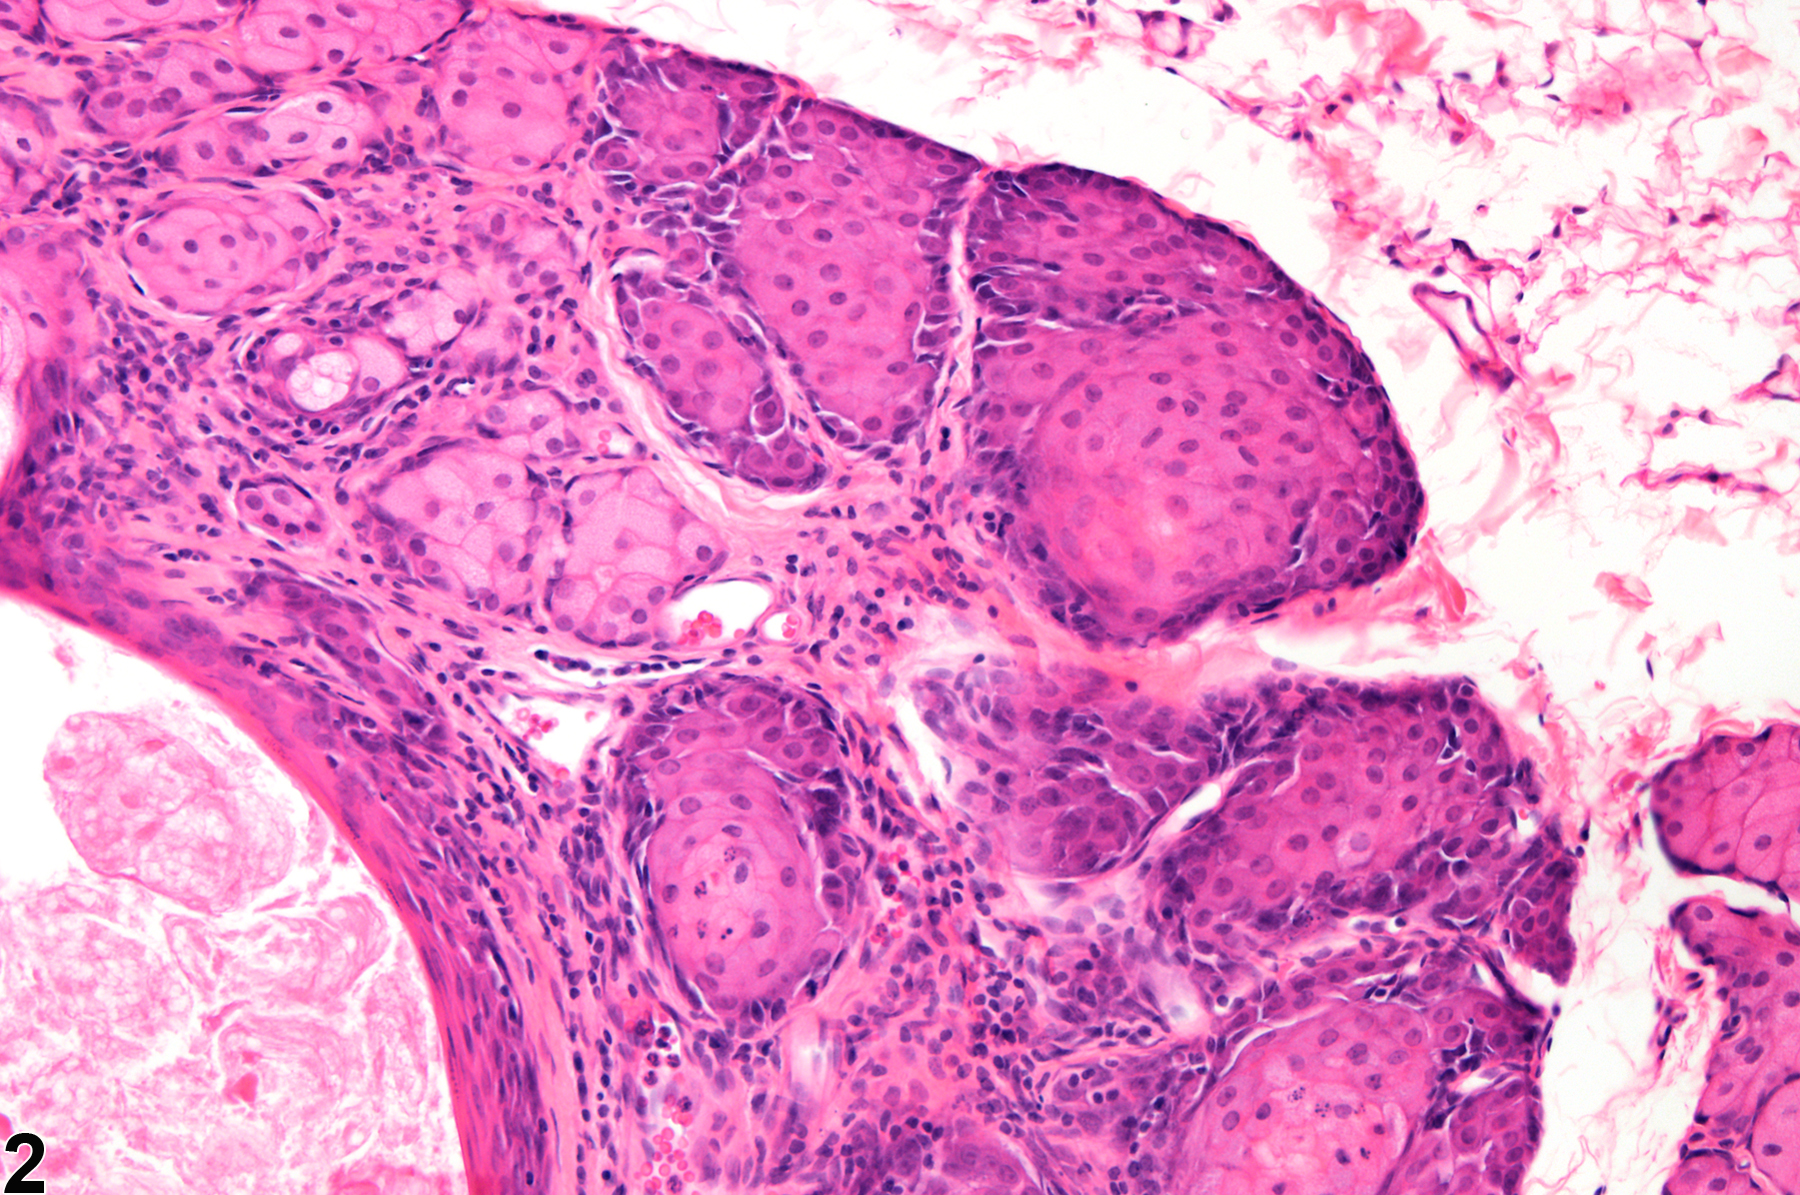 Image of hyperplasia in the Zymbal's gland from a female F344/N rat in a chronic study